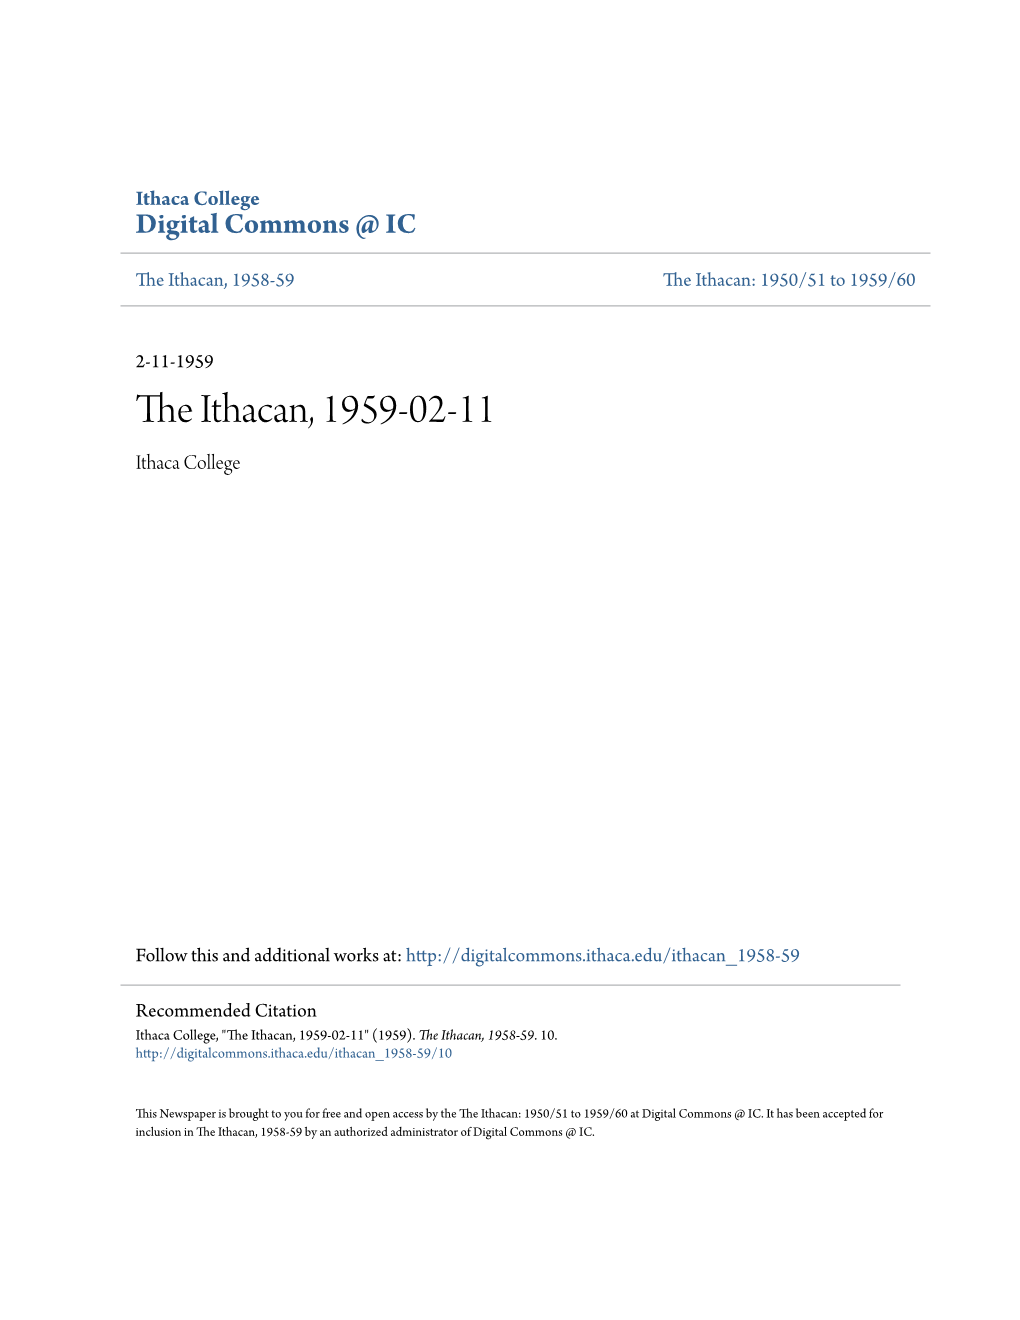 The Ithacan, 1959-02-11